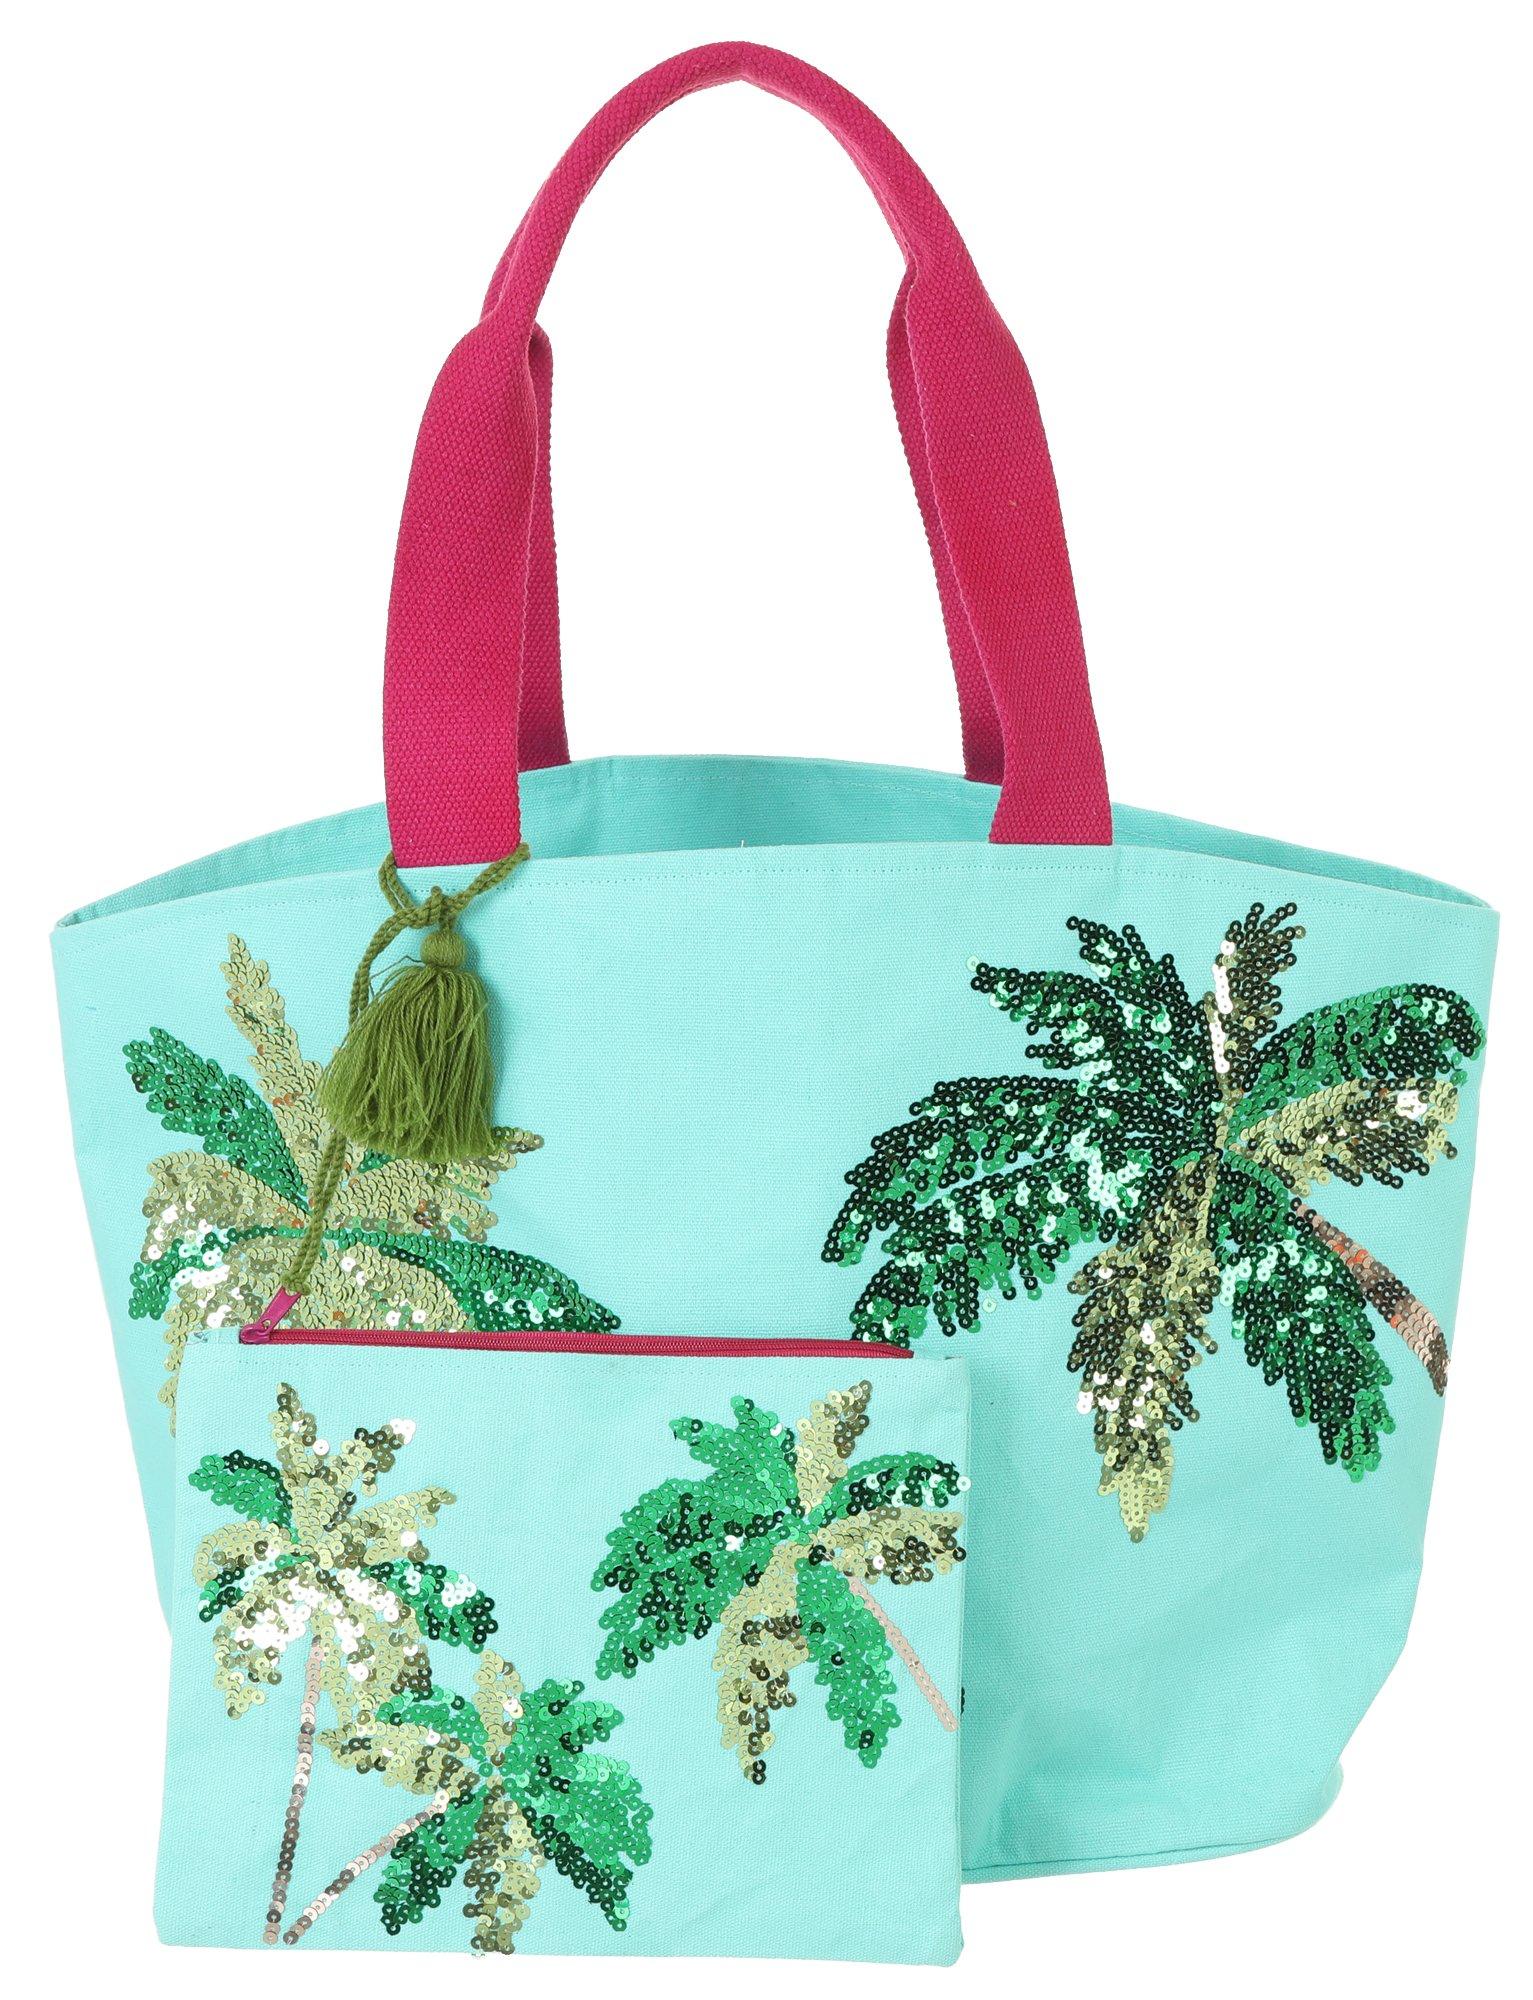 Palm Tree Sequin Beach Tote & Matching Clutch